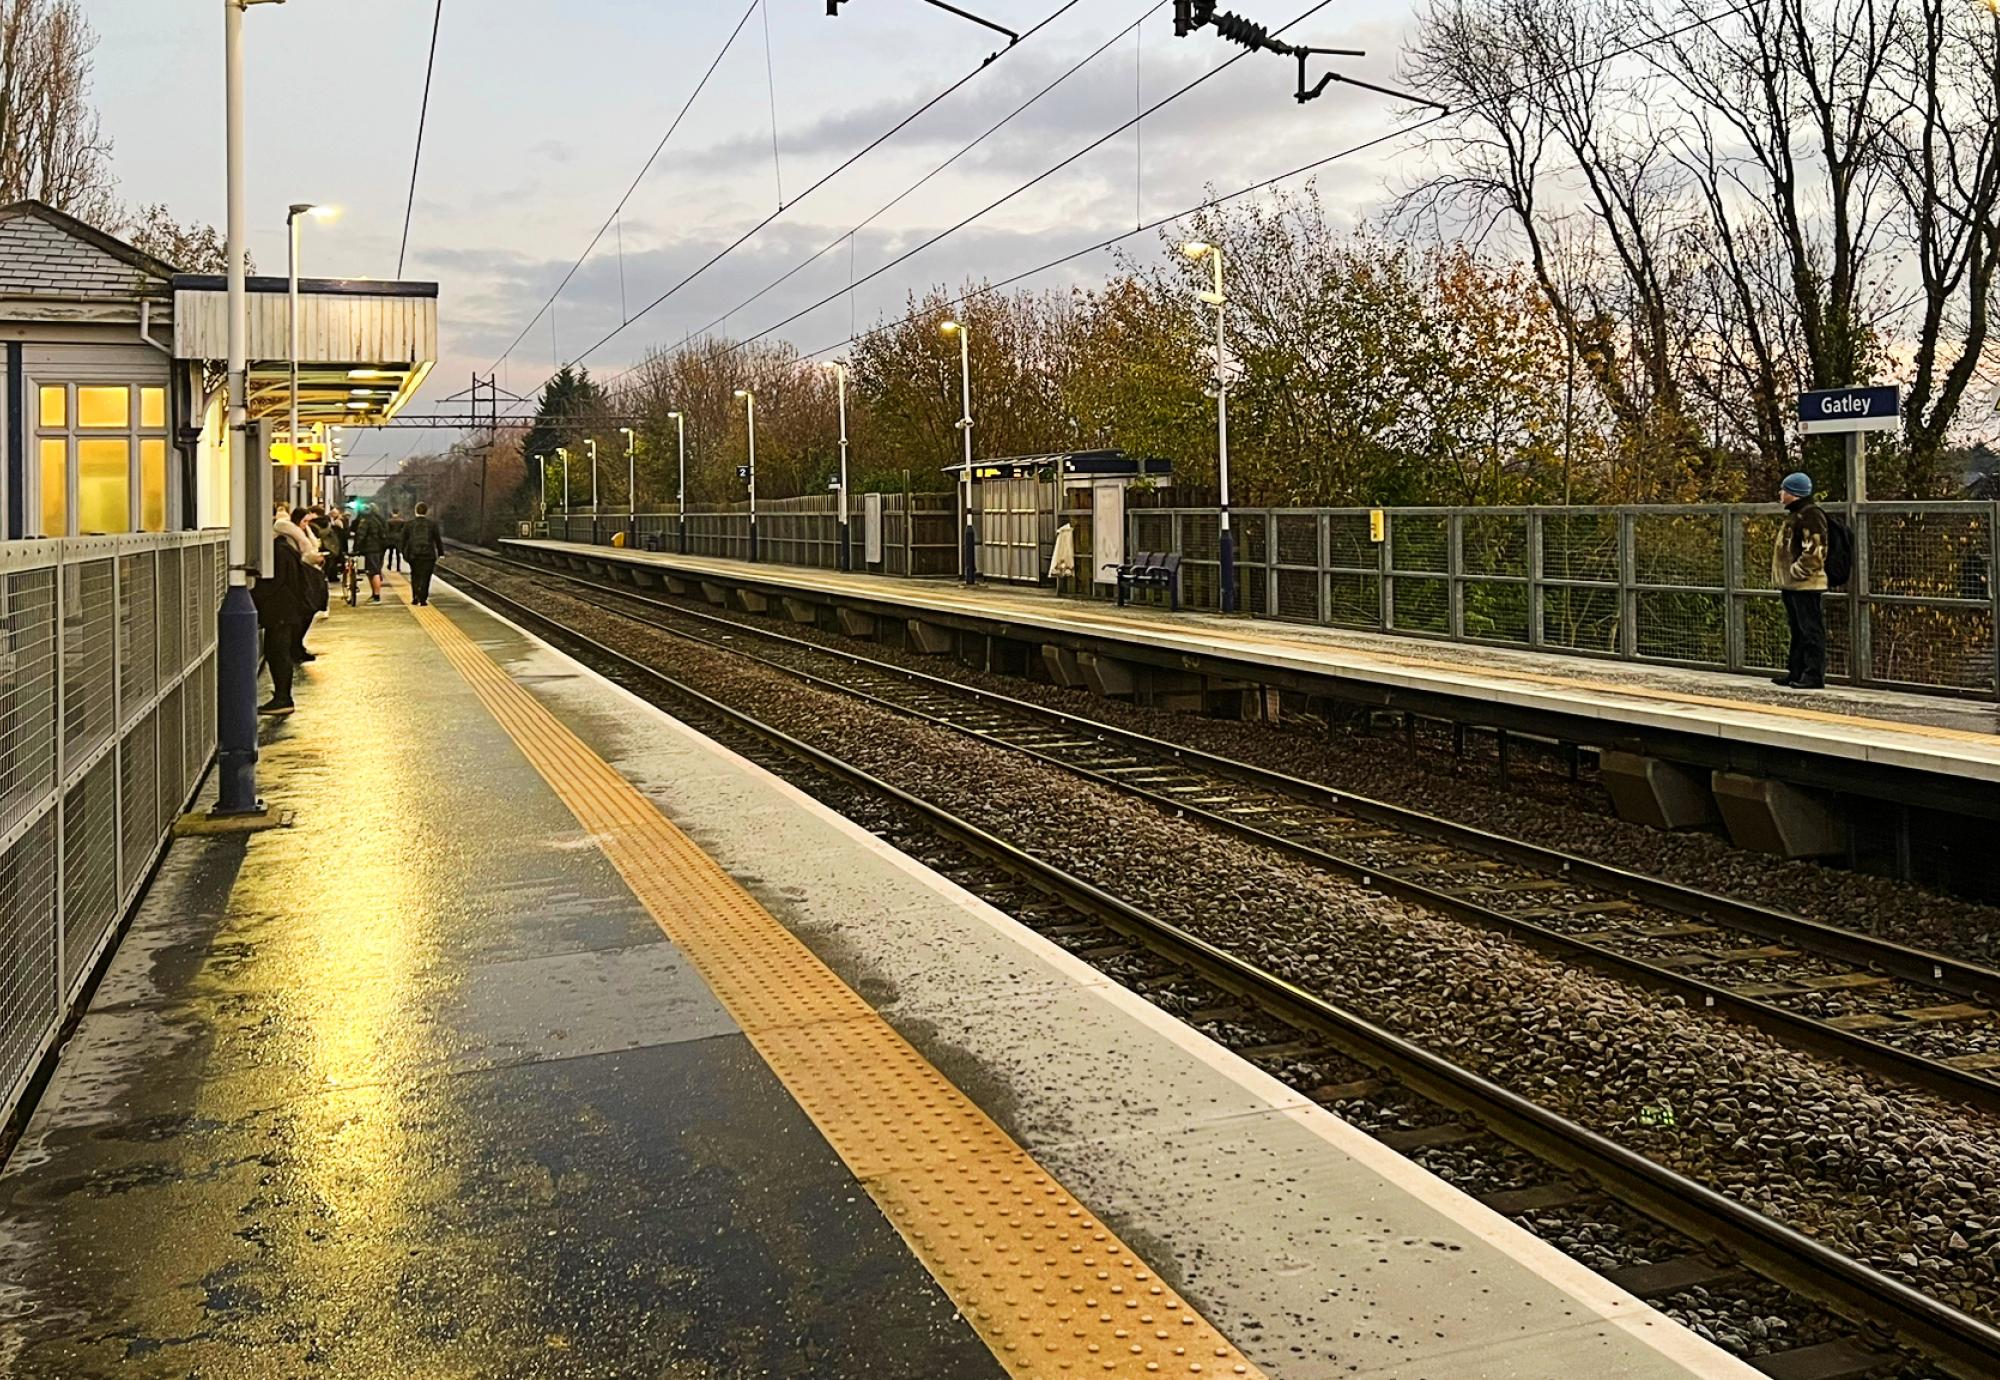 Gatley station Dec 22 ahead of platform extensions in early 2023, via Network Rail 